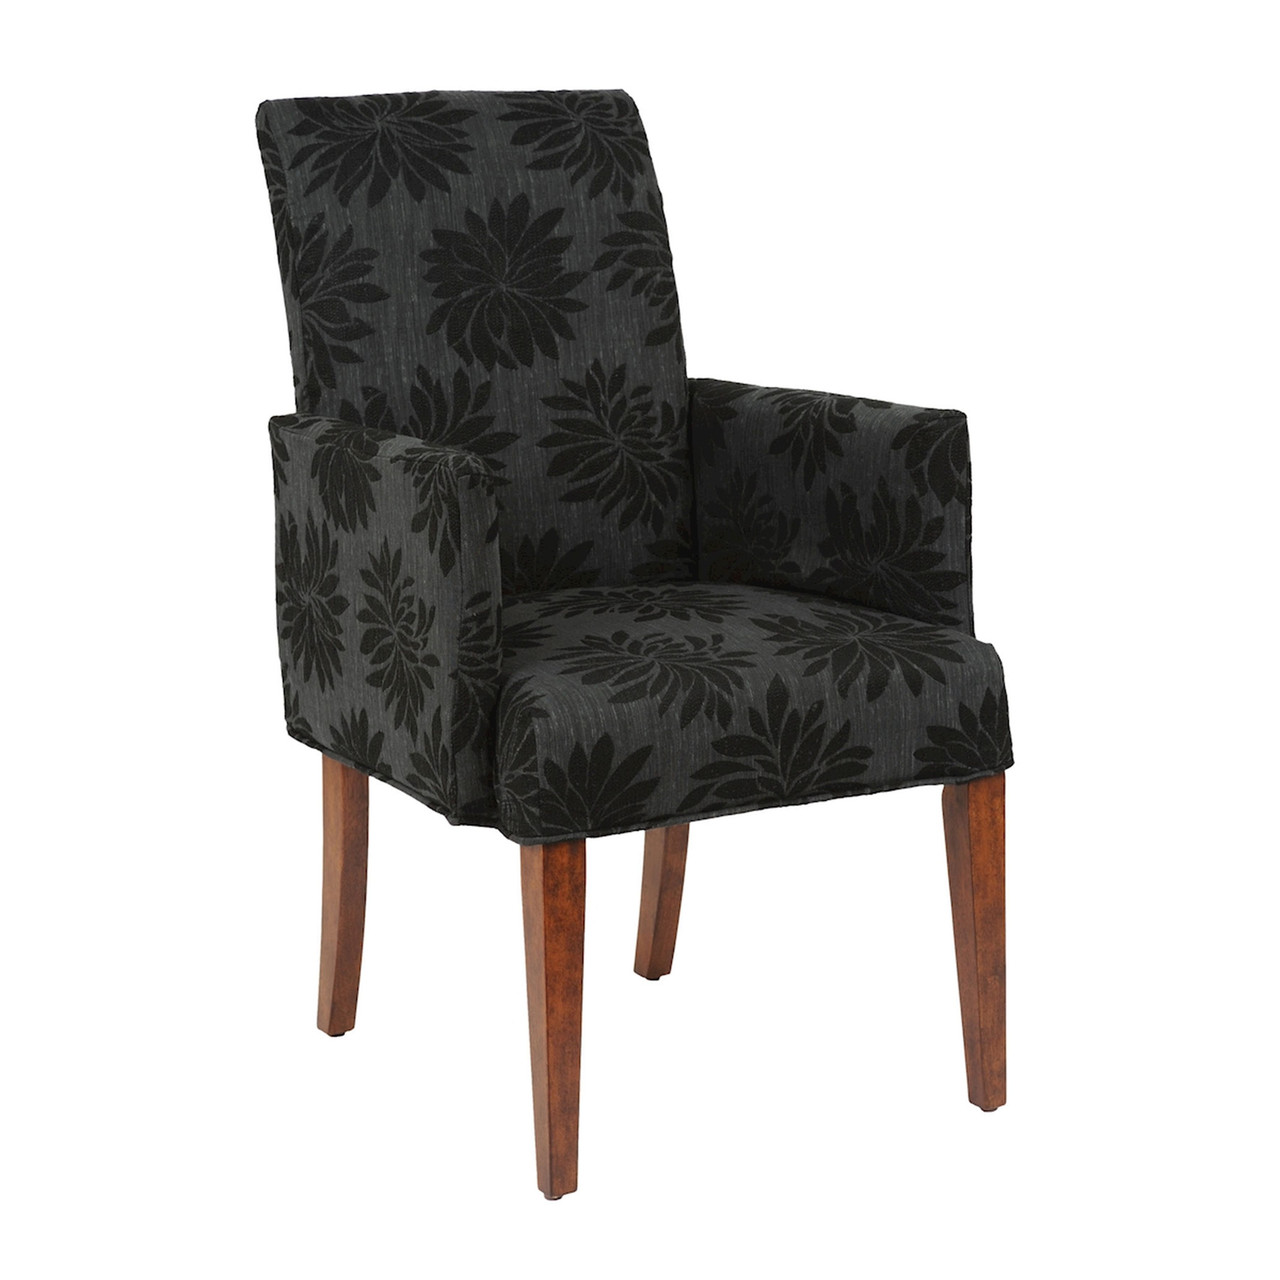 ELK HOME 6080499 Pertsorka Armchair - COVER ONLY